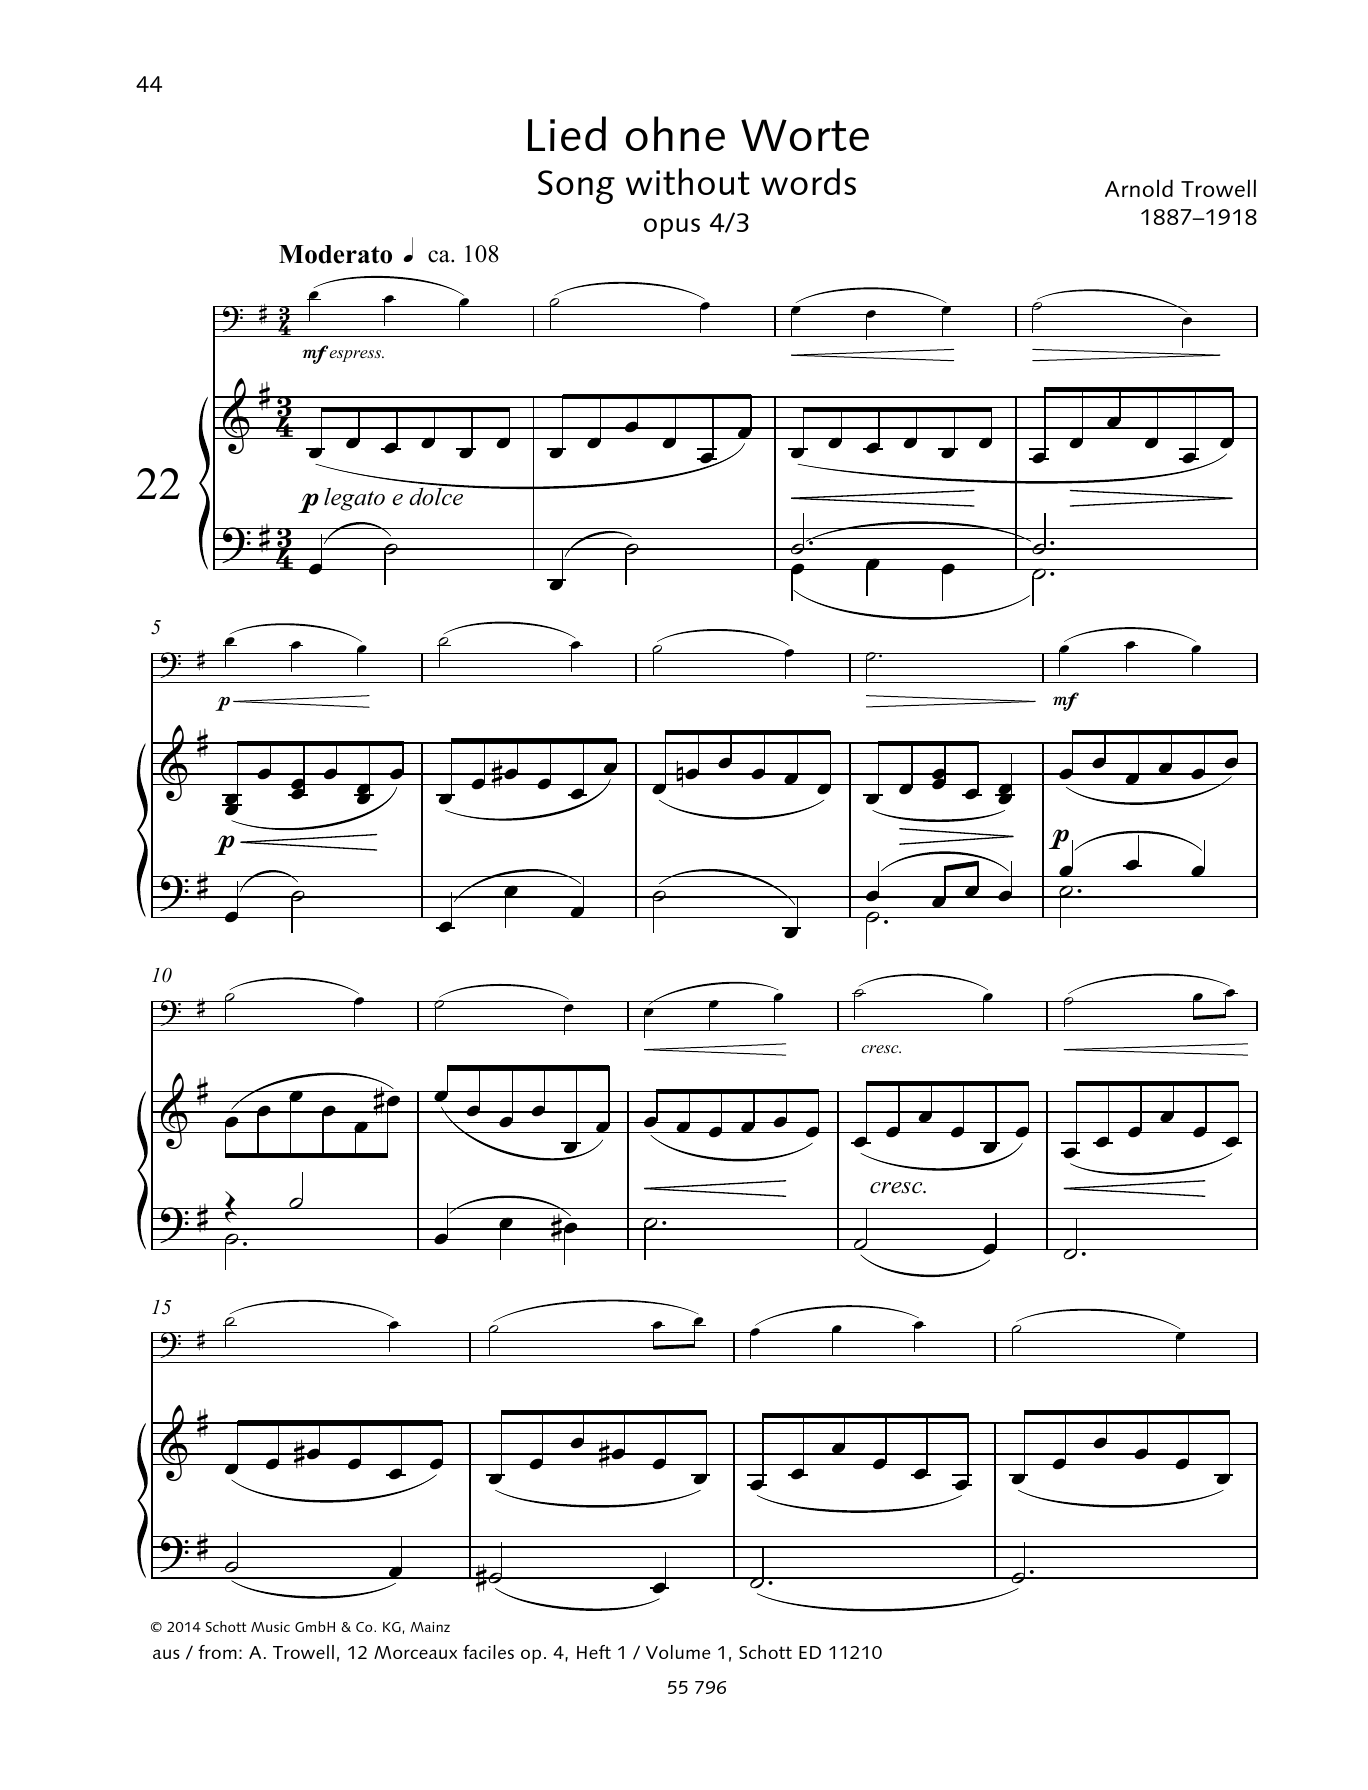 Download Arnold Trowell Song Without Words Sheet Music